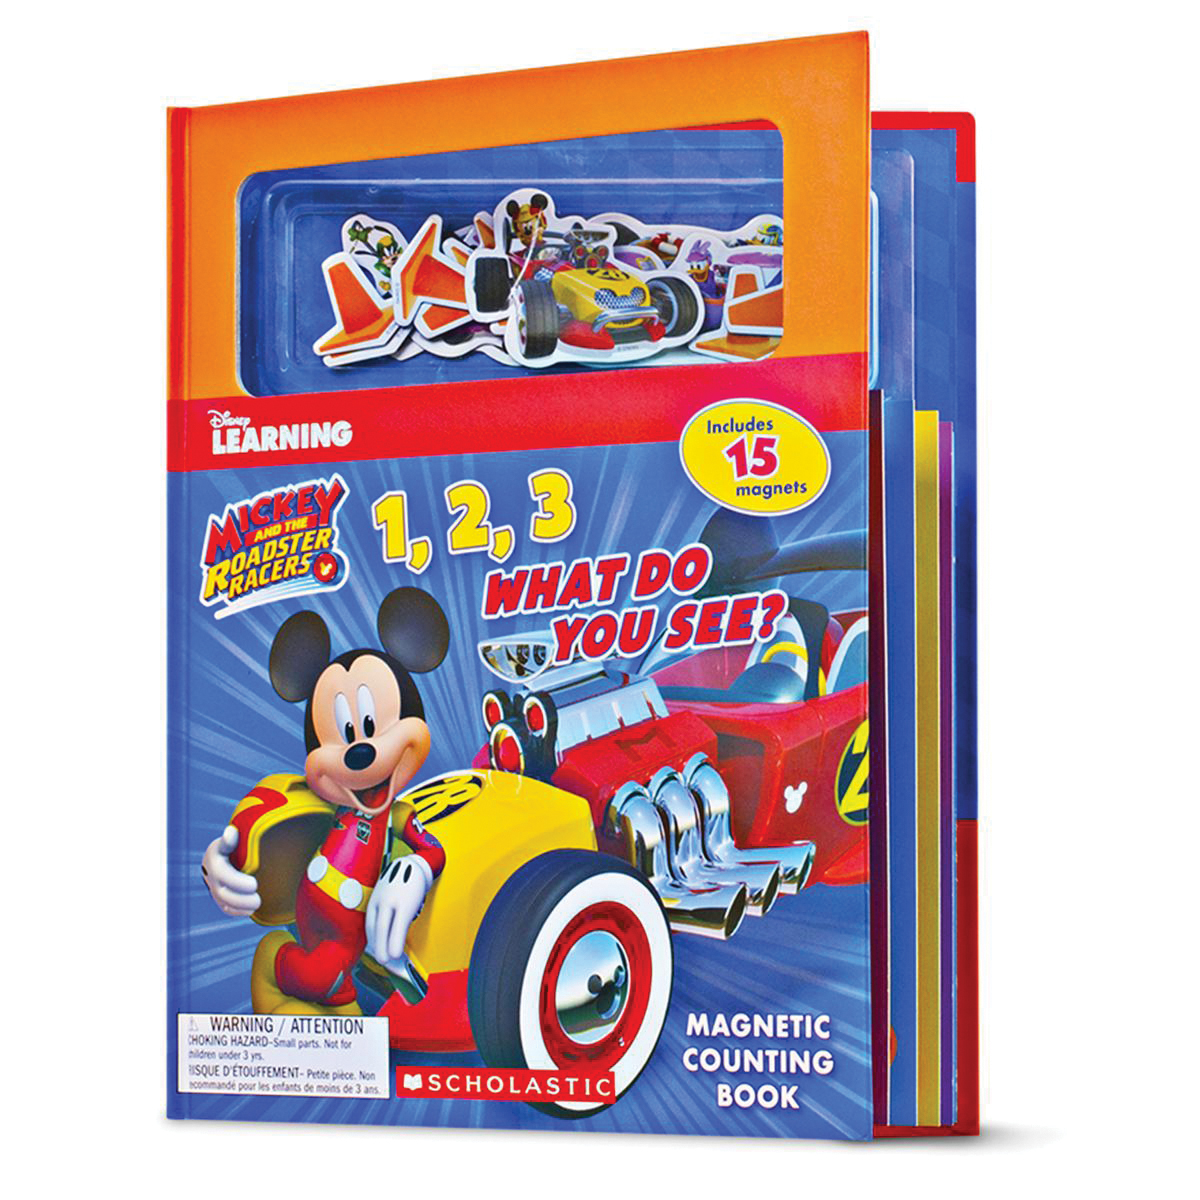  Disney Learning: Mickey and the Roadster Racers 